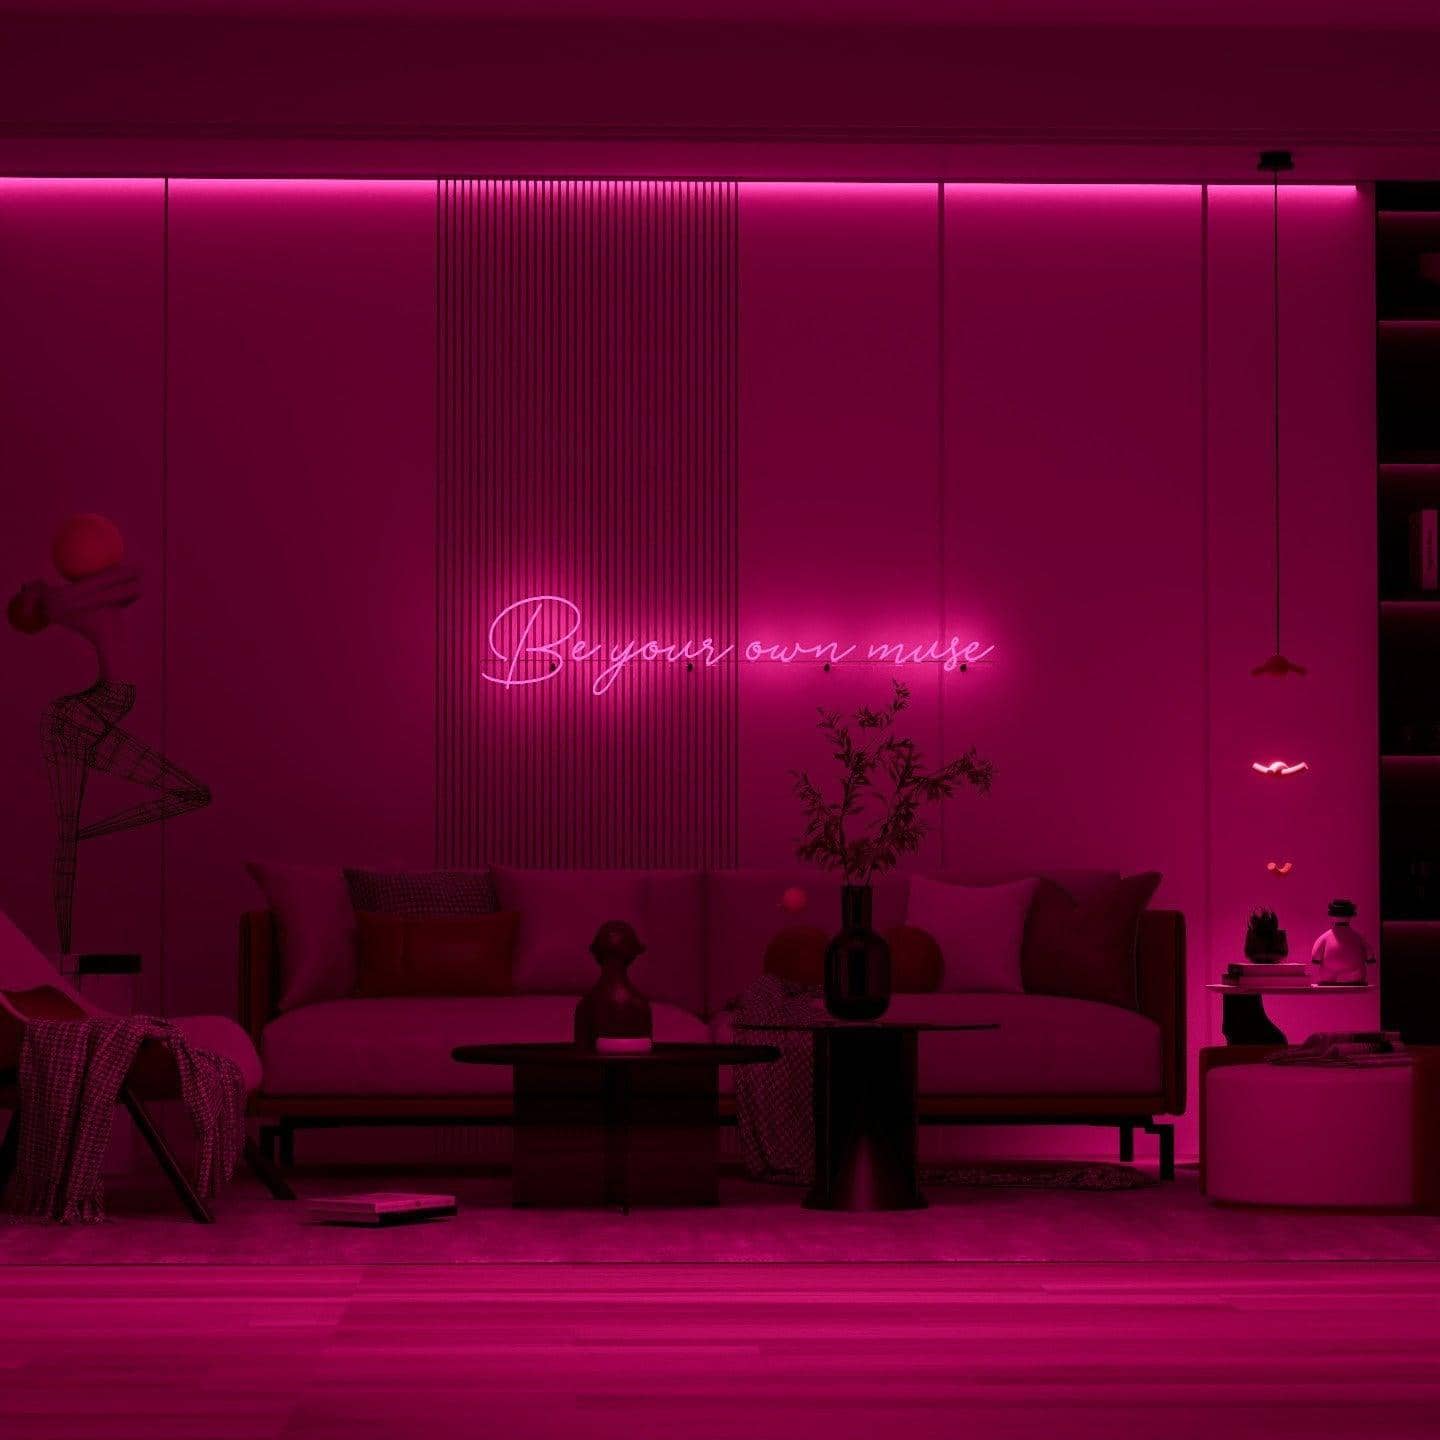 dark-night-lit-pink-neon-lights-hanging-on-the-wall-for-display-be-your-own-muse